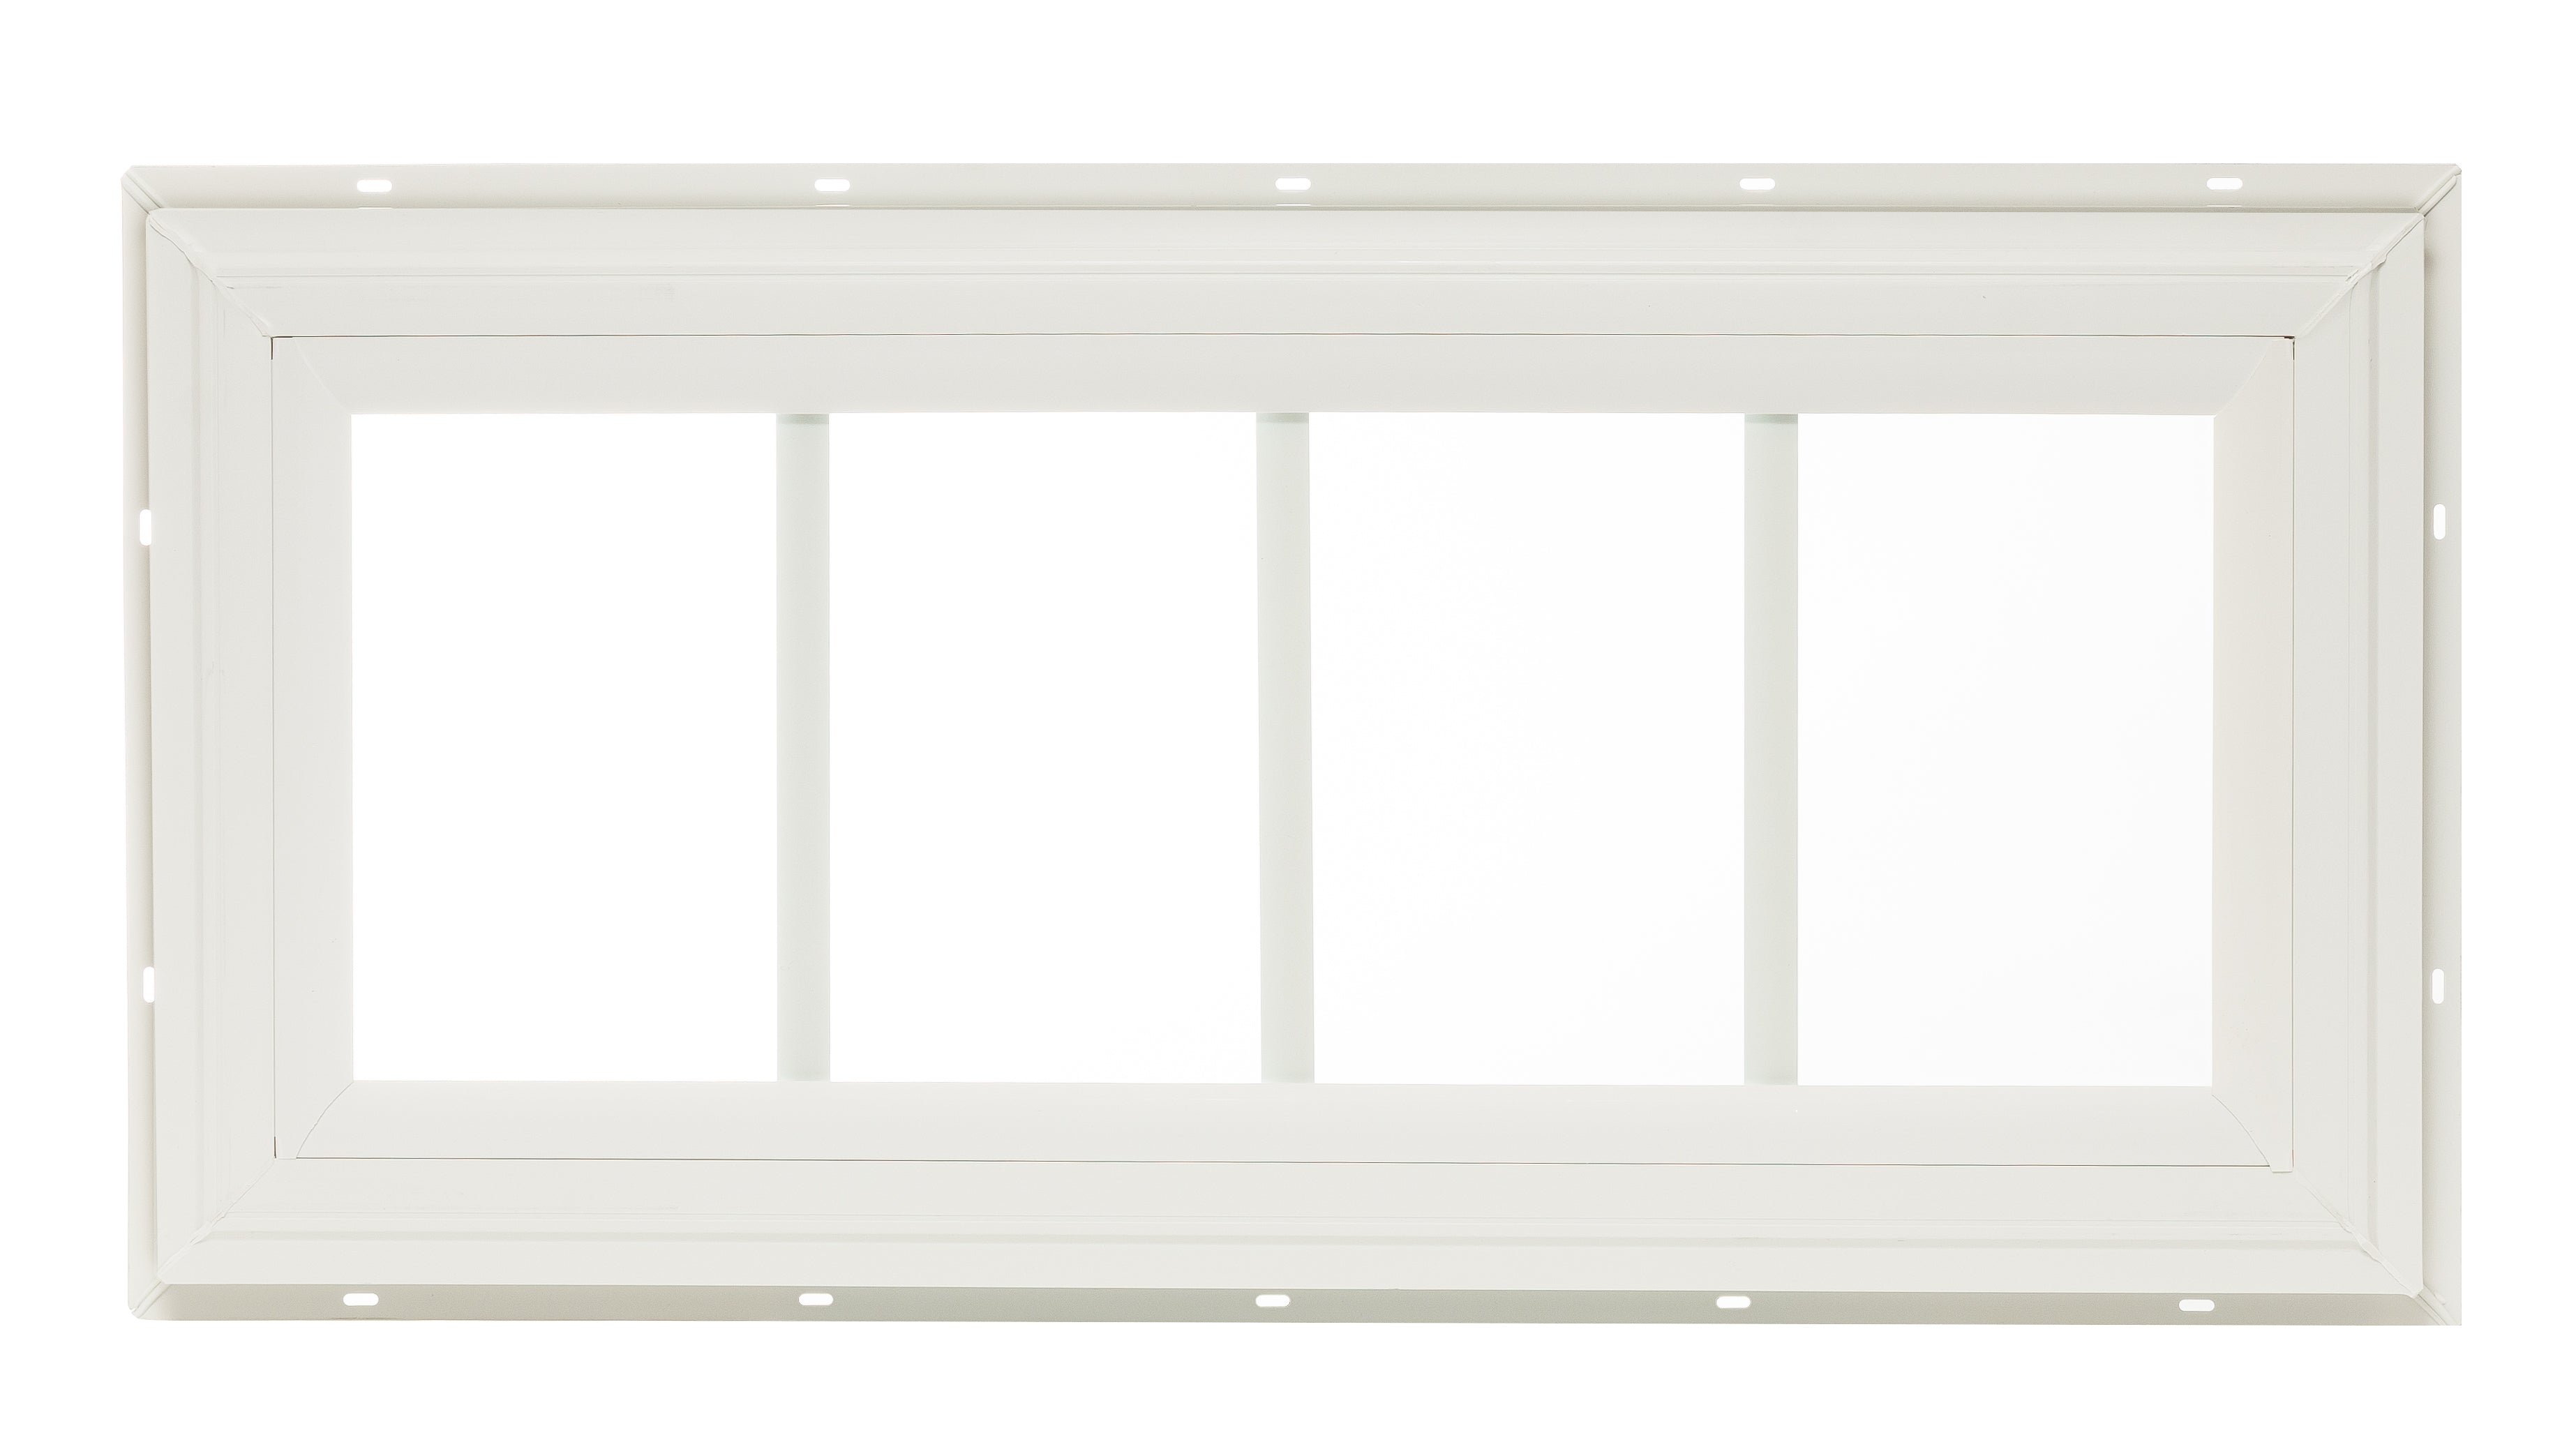 10.185" X 23" Transom J-Lap PVC White Window for Sheds, Playhouses, and MORE 1 PK